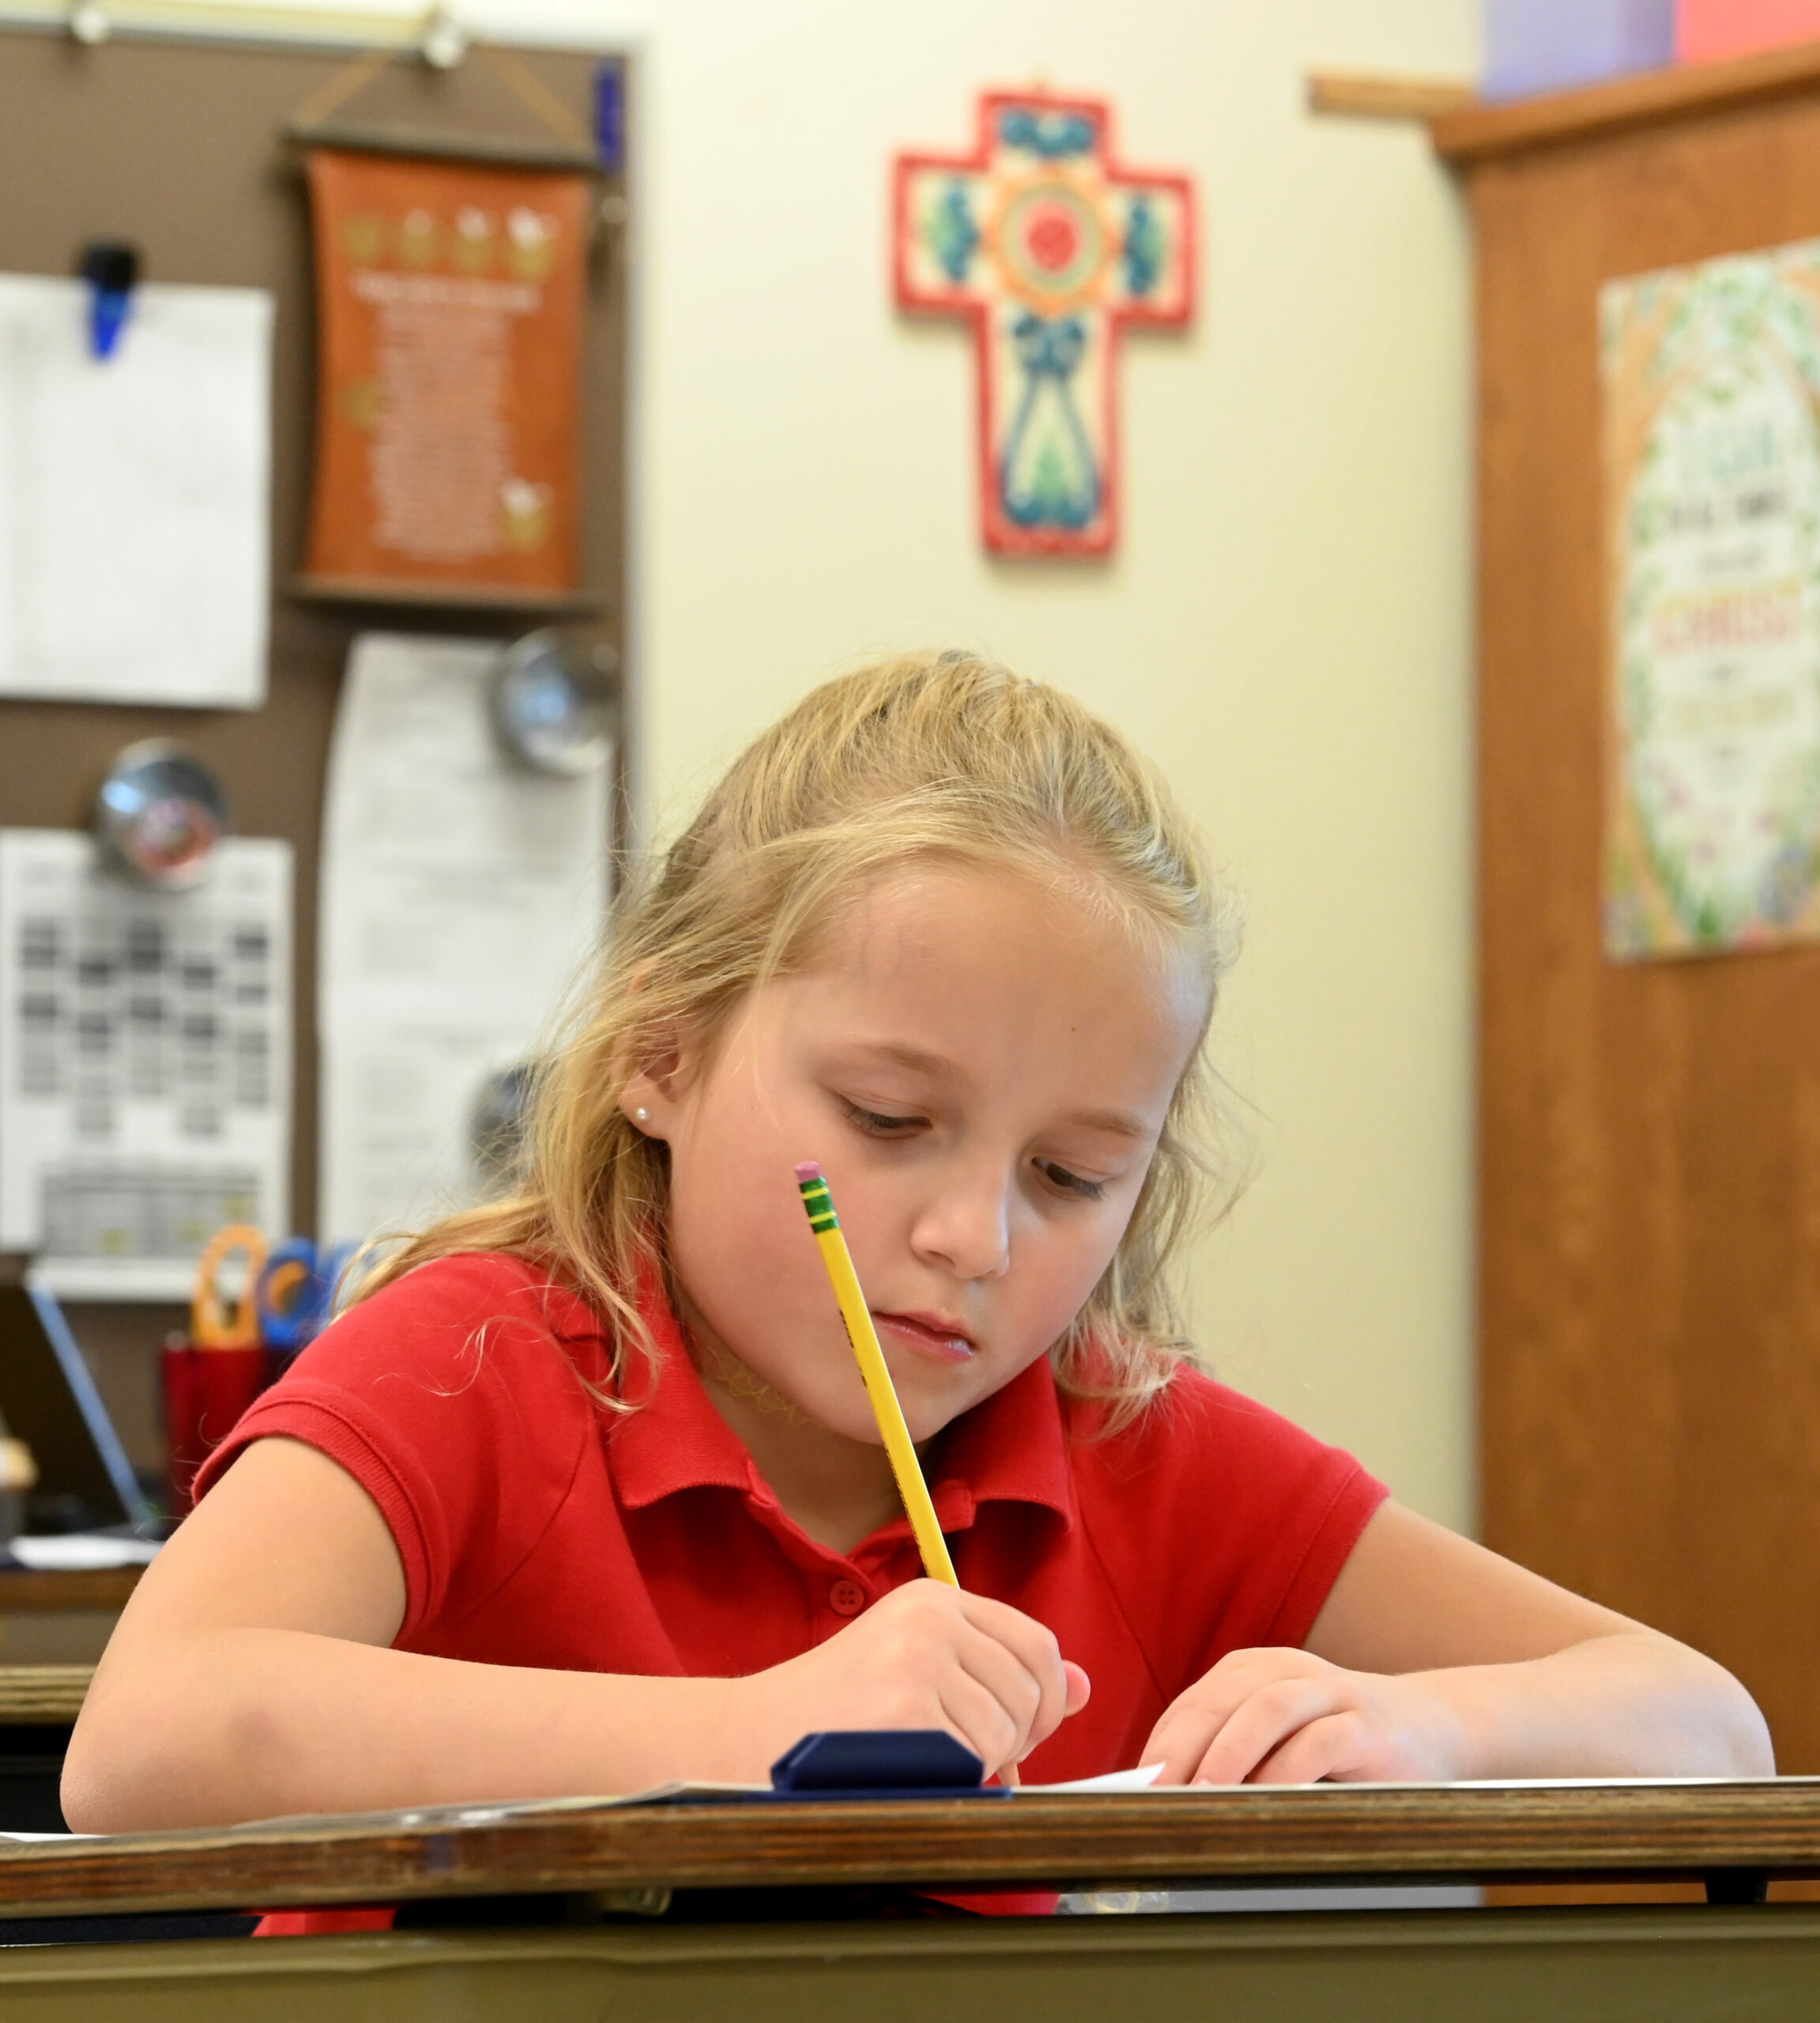 Student writes during class at Holy Cross School which is located near the Red Smith neighborhood.